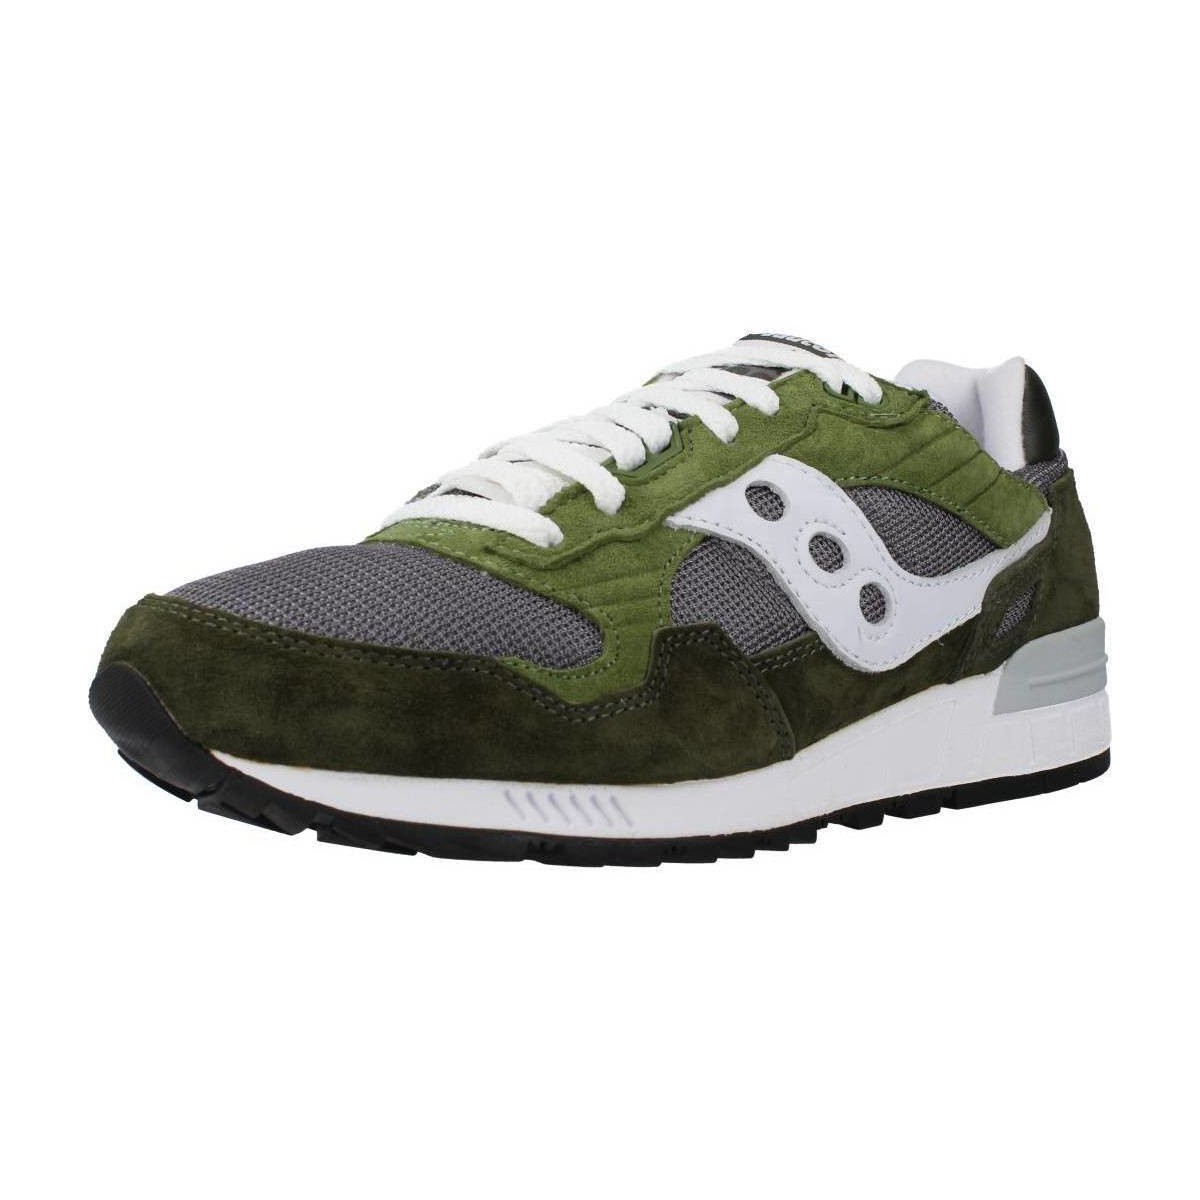 Chaussures Homme Baskets mode Saucony SHADOW 5000 Vert